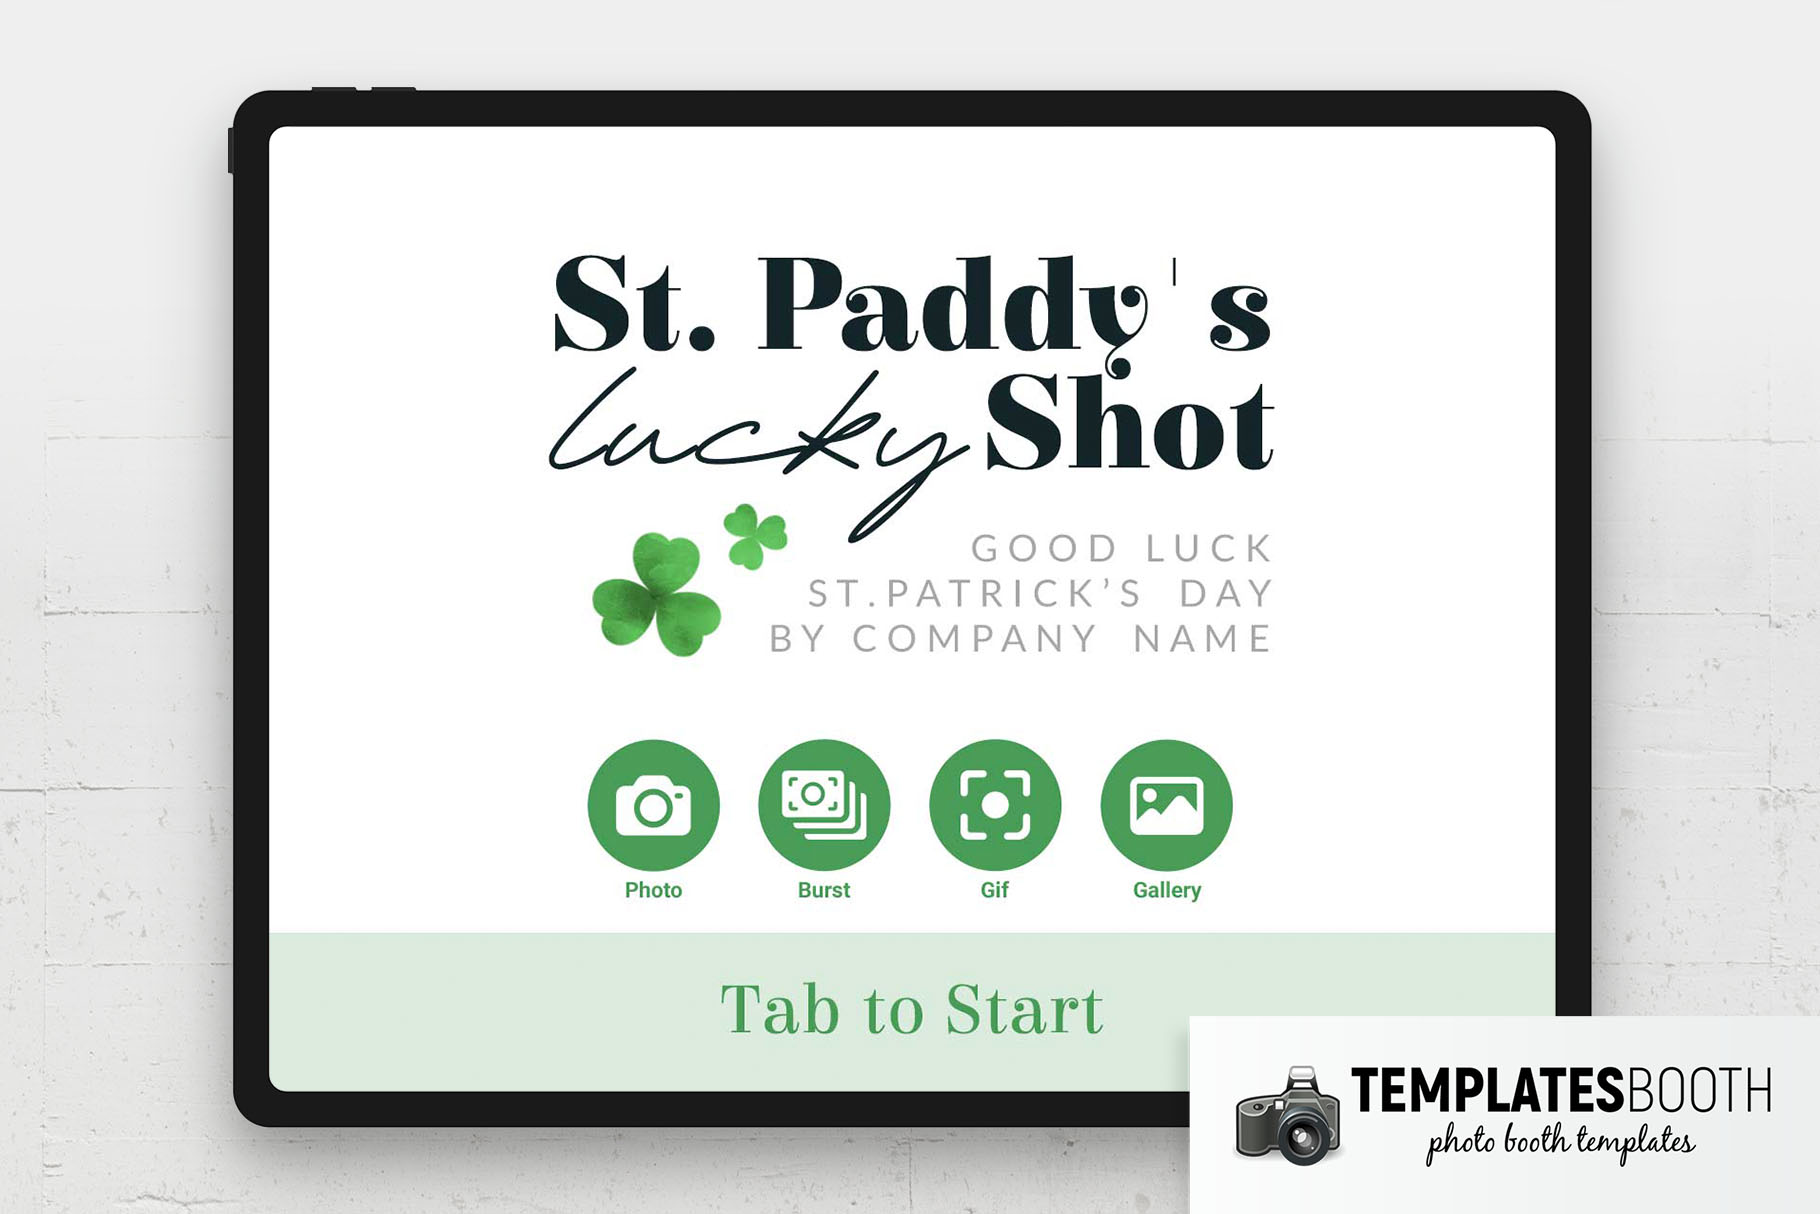 Minimal St. Patrick's Day Photo Booth Welcome Screen